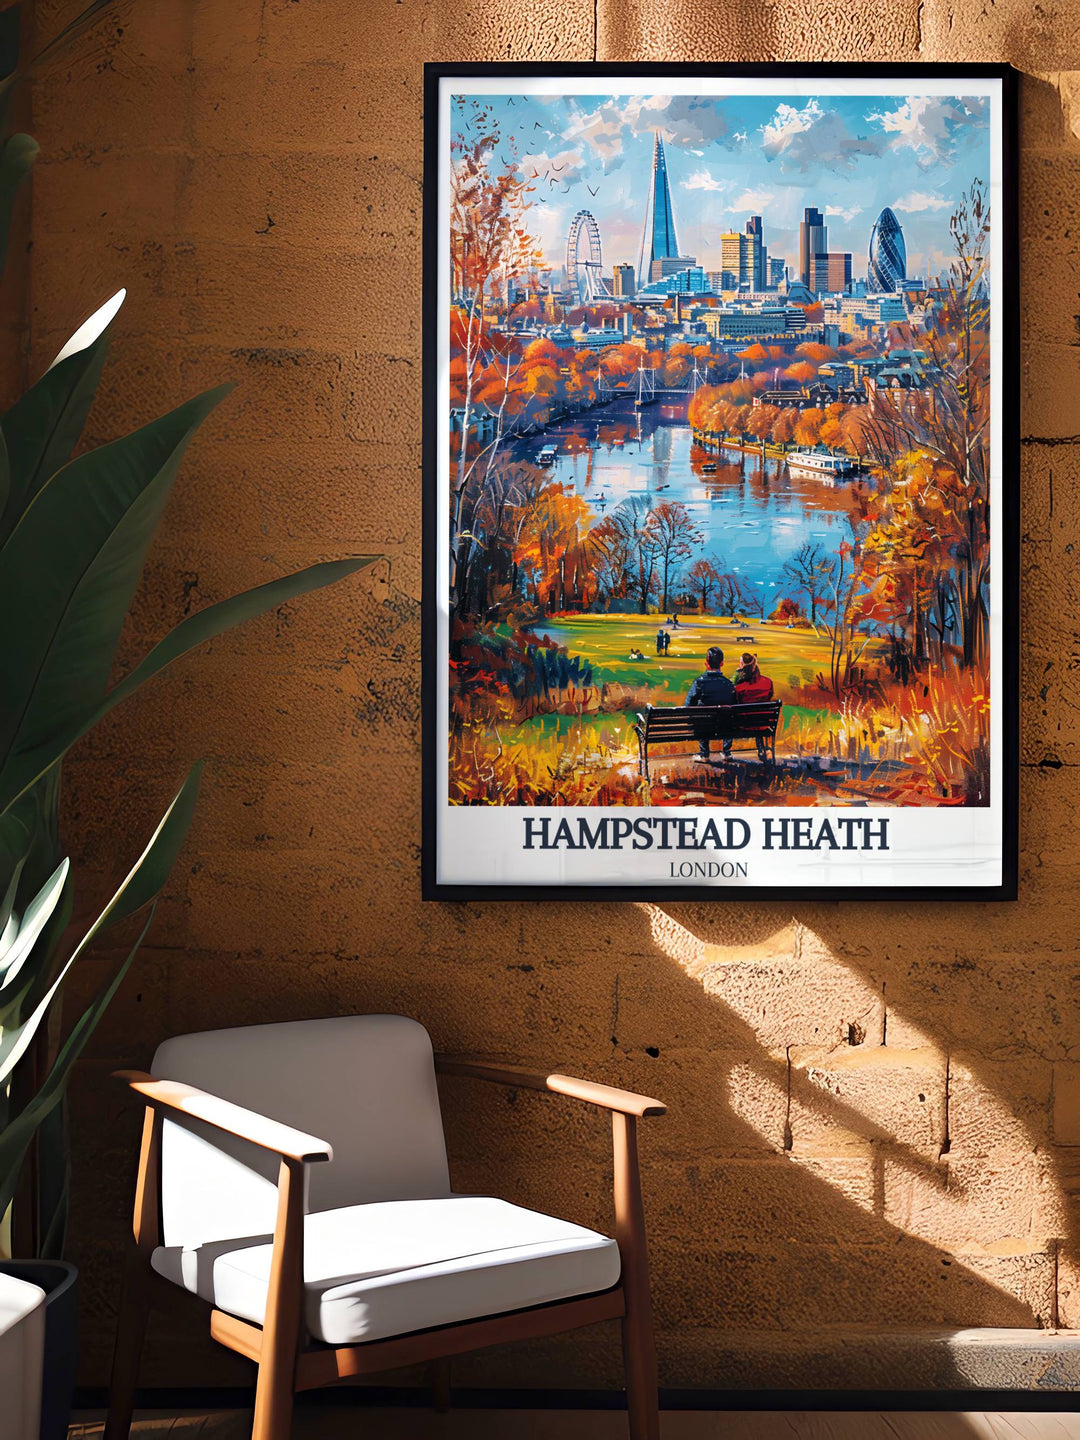 Dynamic London Skyline print from Hampstead Heath, featuring iconic buildings and landmarks amidst the lush parkland, encapsulating the spirit of London.